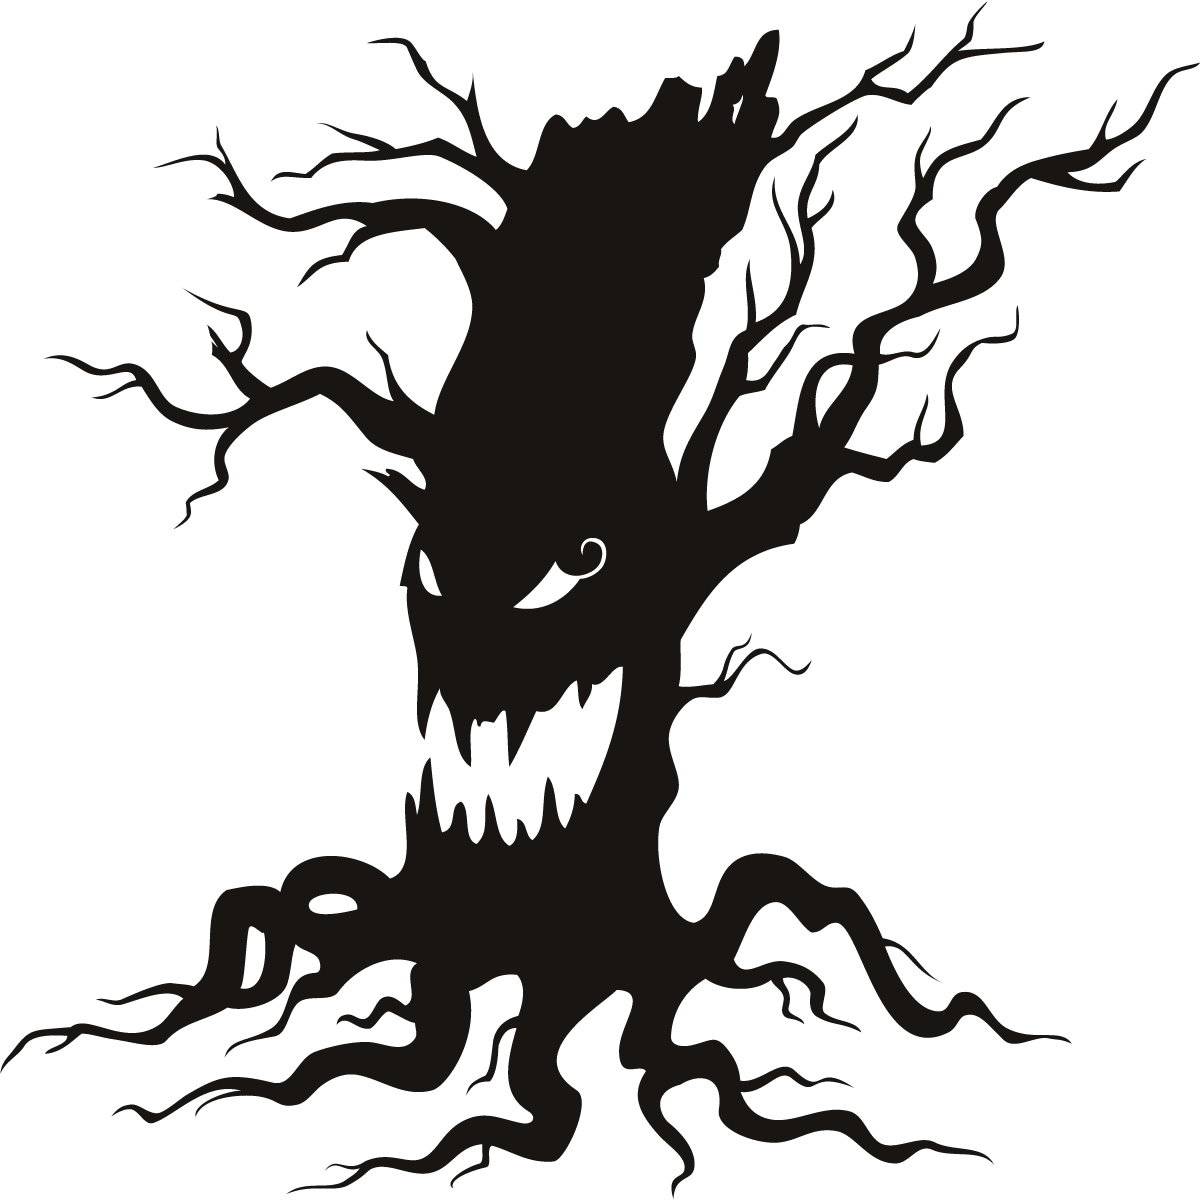 Scary Tree - ClipArt Best